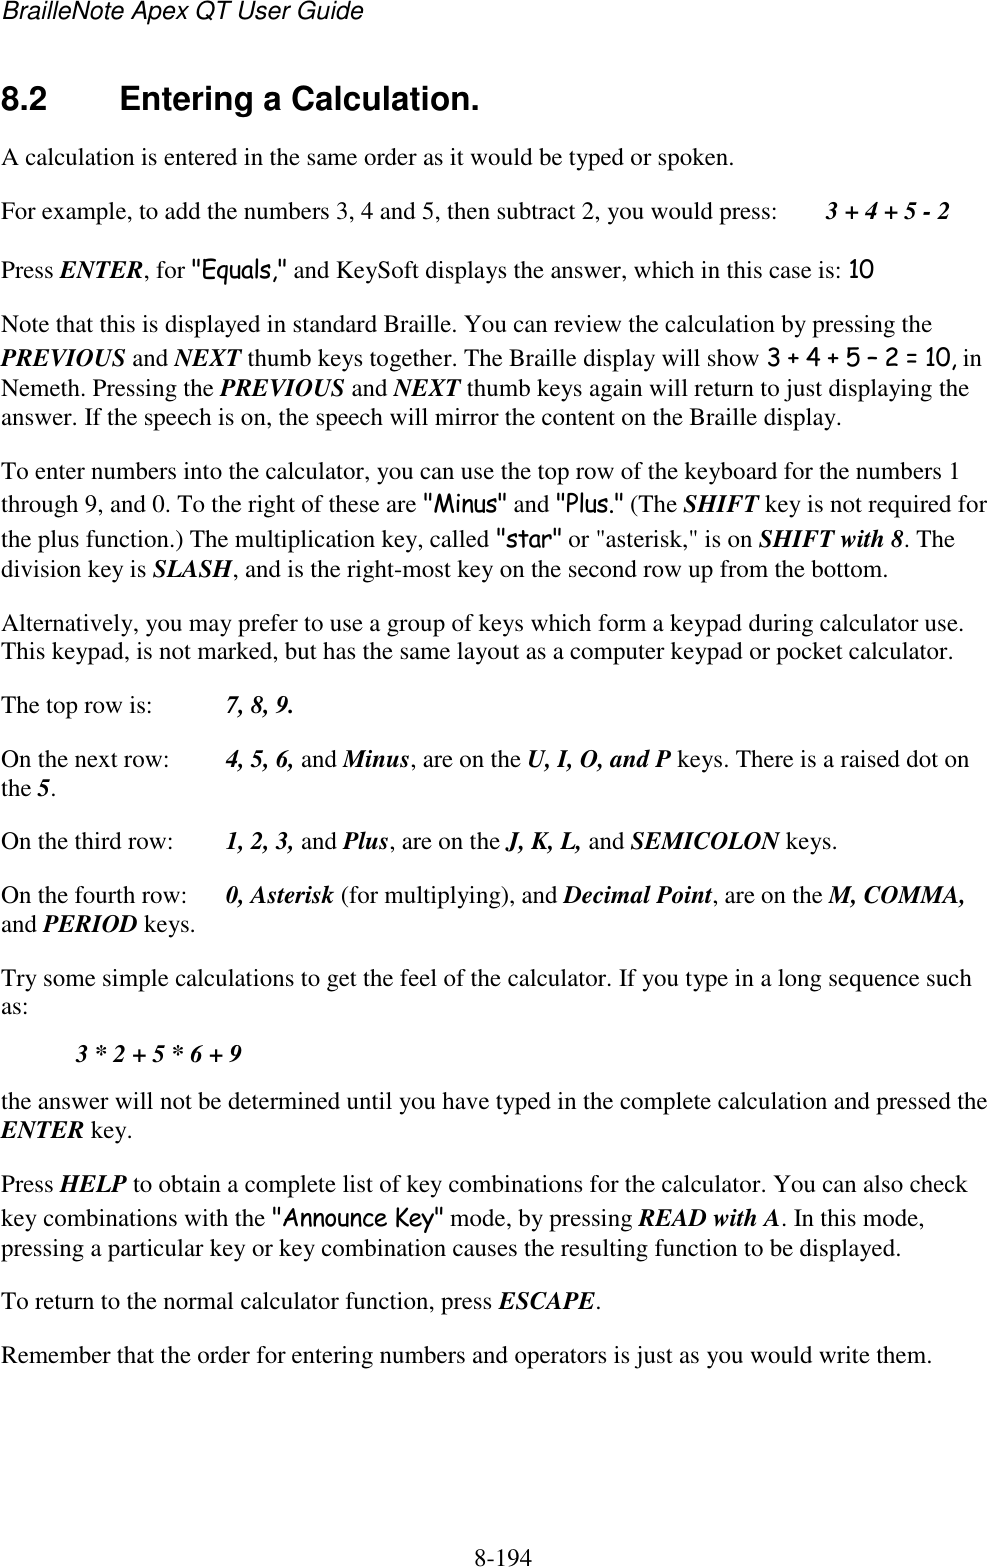 BrailleNote Apex QT User Guide  8-194   8.2  Entering a Calculation. A calculation is entered in the same order as it would be typed or spoken. For example, to add the numbers 3, 4 and 5, then subtract 2, you would press:   3 + 4 + 5 - 2 Press ENTER, for &quot;Equals,&quot; and KeySoft displays the answer, which in this case is: 10 Note that this is displayed in standard Braille. You can review the calculation by pressing the PREVIOUS and NEXT thumb keys together. The Braille display will show 3 + 4 + 5 – 2 = 10, in Nemeth. Pressing the PREVIOUS and NEXT thumb keys again will return to just displaying the answer. If the speech is on, the speech will mirror the content on the Braille display. To enter numbers into the calculator, you can use the top row of the keyboard for the numbers 1 through 9, and 0. To the right of these are &quot;Minus&quot; and &quot;Plus.&quot; (The SHIFT key is not required for the plus function.) The multiplication key, called &quot;star&quot; or &quot;asterisk,&quot; is on SHIFT with 8. The division key is SLASH, and is the right-most key on the second row up from the bottom. Alternatively, you may prefer to use a group of keys which form a keypad during calculator use. This keypad, is not marked, but has the same layout as a computer keypad or pocket calculator. The top row is:  7, 8, 9. On the next row:  4, 5, 6, and Minus, are on the U, I, O, and P keys. There is a raised dot on the 5. On the third row:   1, 2, 3, and Plus, are on the J, K, L, and SEMICOLON keys. On the fourth row:  0, Asterisk (for multiplying), and Decimal Point, are on the M, COMMA, and PERIOD keys. Try some simple calculations to get the feel of the calculator. If you type in a long sequence such as:   3 * 2 + 5 * 6 + 9 the answer will not be determined until you have typed in the complete calculation and pressed the ENTER key. Press HELP to obtain a complete list of key combinations for the calculator. You can also check key combinations with the &quot;Announce Key&quot; mode, by pressing READ with A. In this mode, pressing a particular key or key combination causes the resulting function to be displayed. To return to the normal calculator function, press ESCAPE. Remember that the order for entering numbers and operators is just as you would write them.   